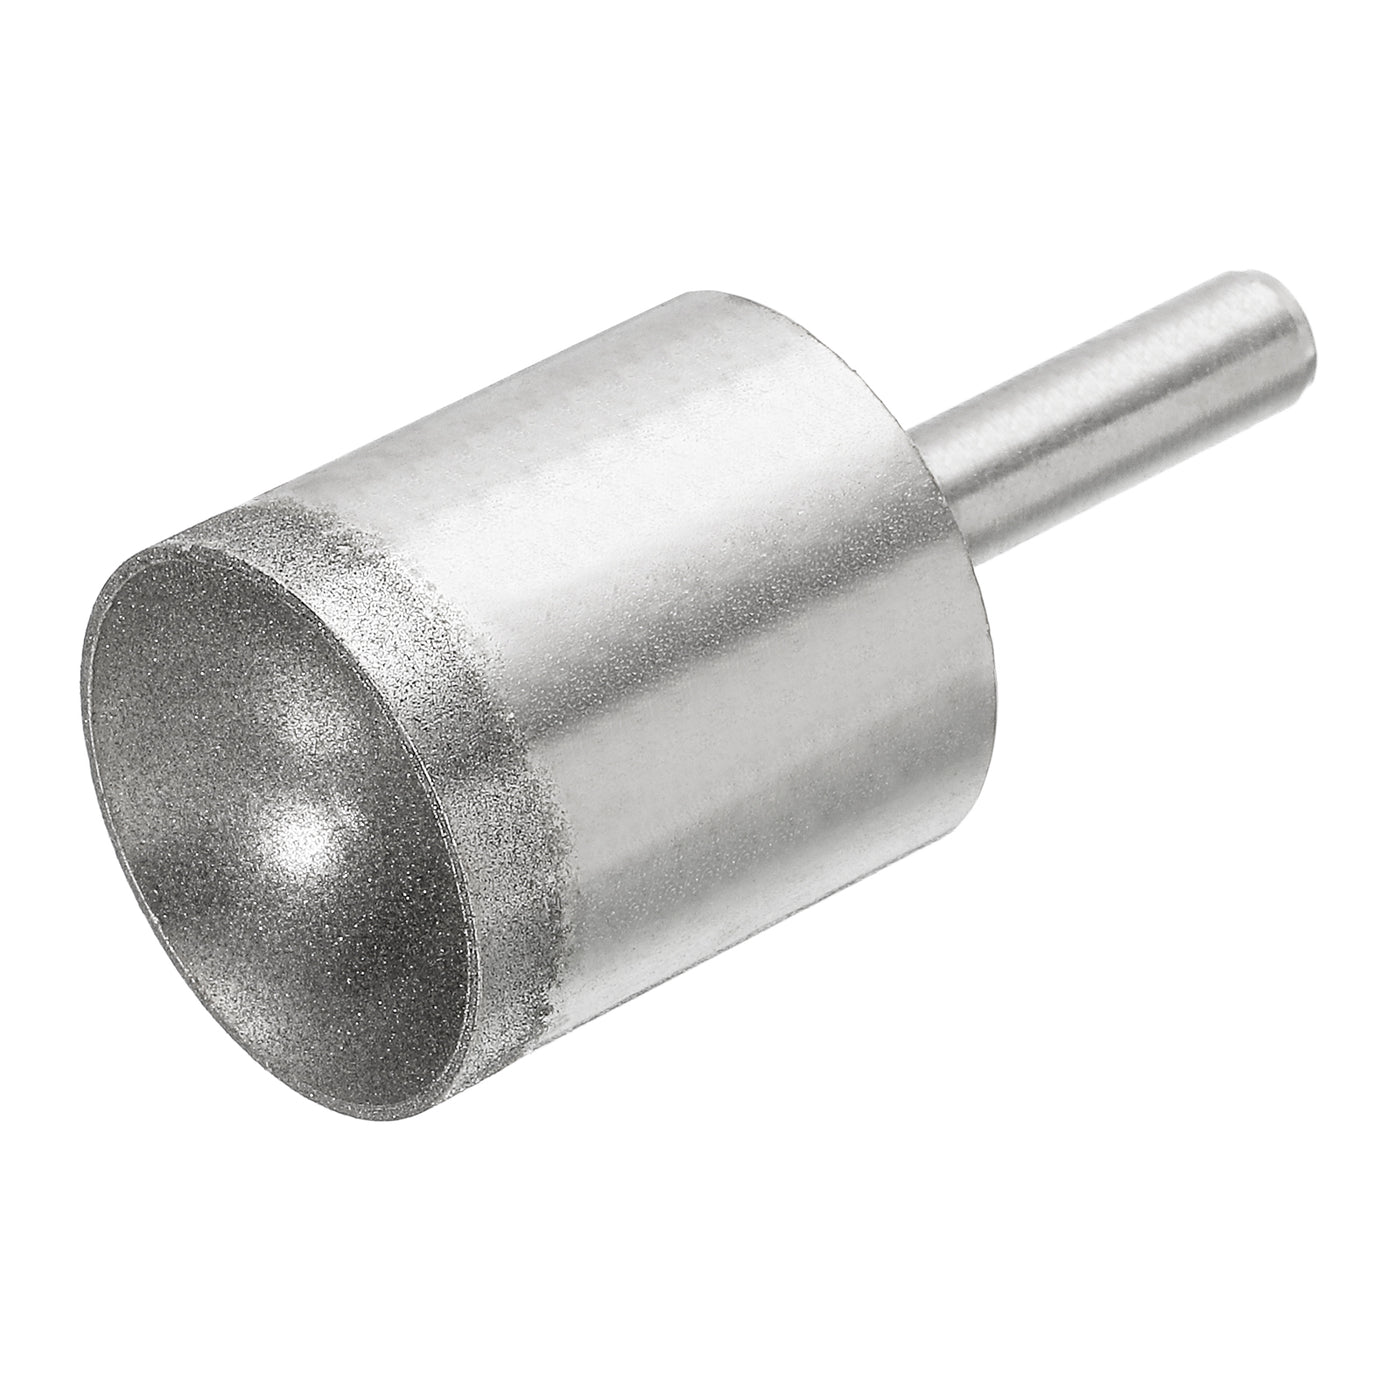 uxcell Uxcell 23mm 600 Grits Diamond Mounted Point Spherical Concave Head Bead Grinding Bit